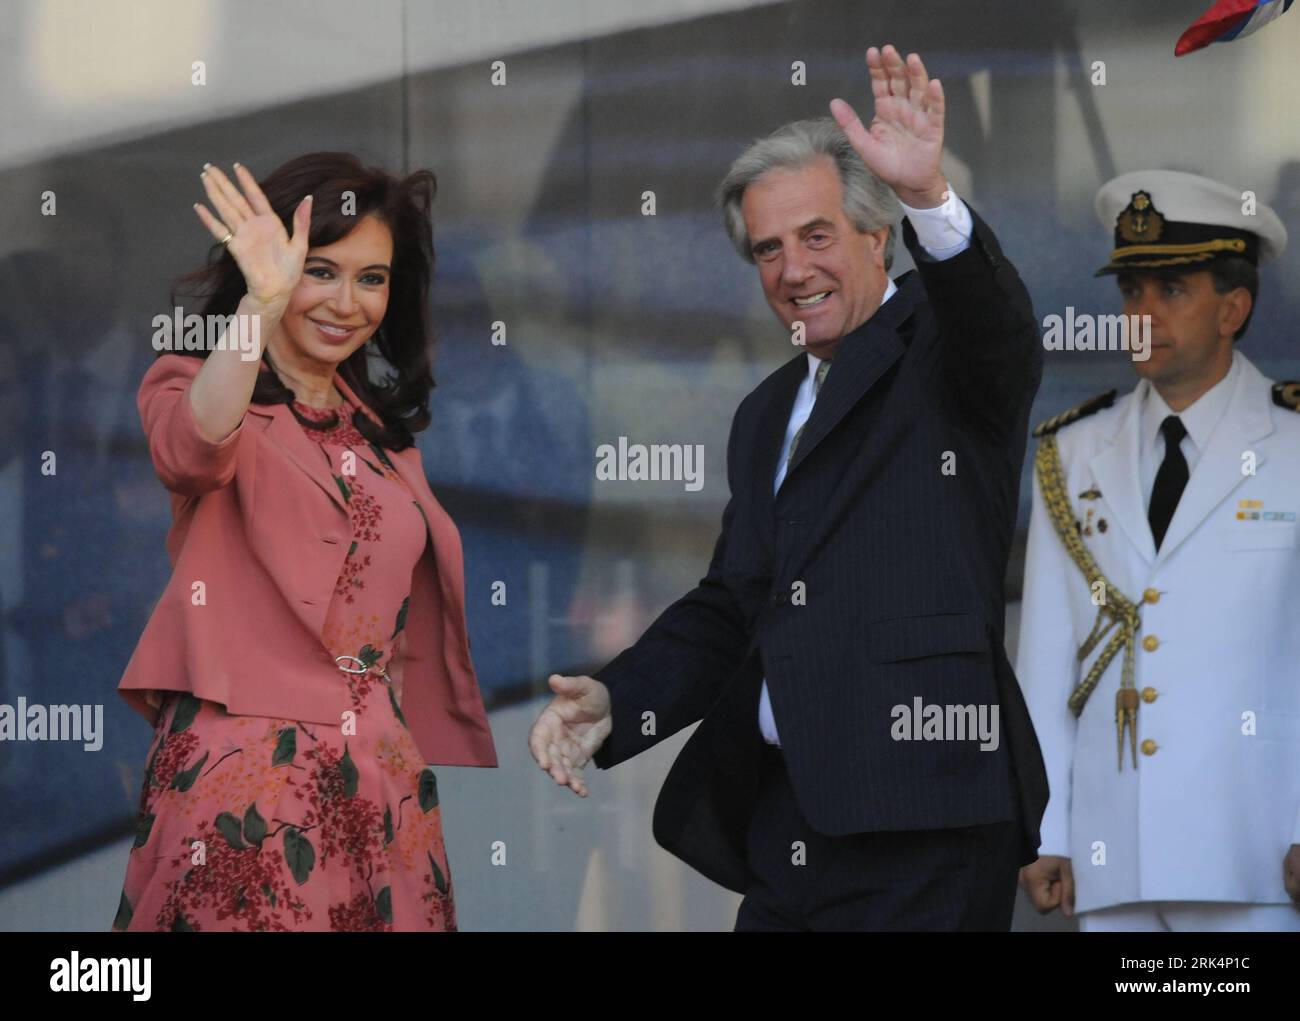 Bildnummer: 53655143  Datum: 08.12.2009  Copyright: imago/Xinhua (091209) -- MONTEVIDEO, Dec. 9, 2009 (Xinhua) -- Argentine President Cristina Fernandez de Kirchner (L) and Uruguayan President Tabare Vazquez wave to the crowd in Montevideo, Uruguay, Dec. 8, 2009. The Common Market of the South (Mercosur) summit finished Tuesday with few results achieved on regional trade issues but with vows to push for a free trade agreement with the European Union (EU). (Xinhua/Nicolas Celaya) (yc) (5)URUGUAY-MERCOSUR-SUMMIT PUBLICATIONxNOTxINxCHN People Politik premiumd kbdig xng 2009 quer     53655143 Date Stock Photo